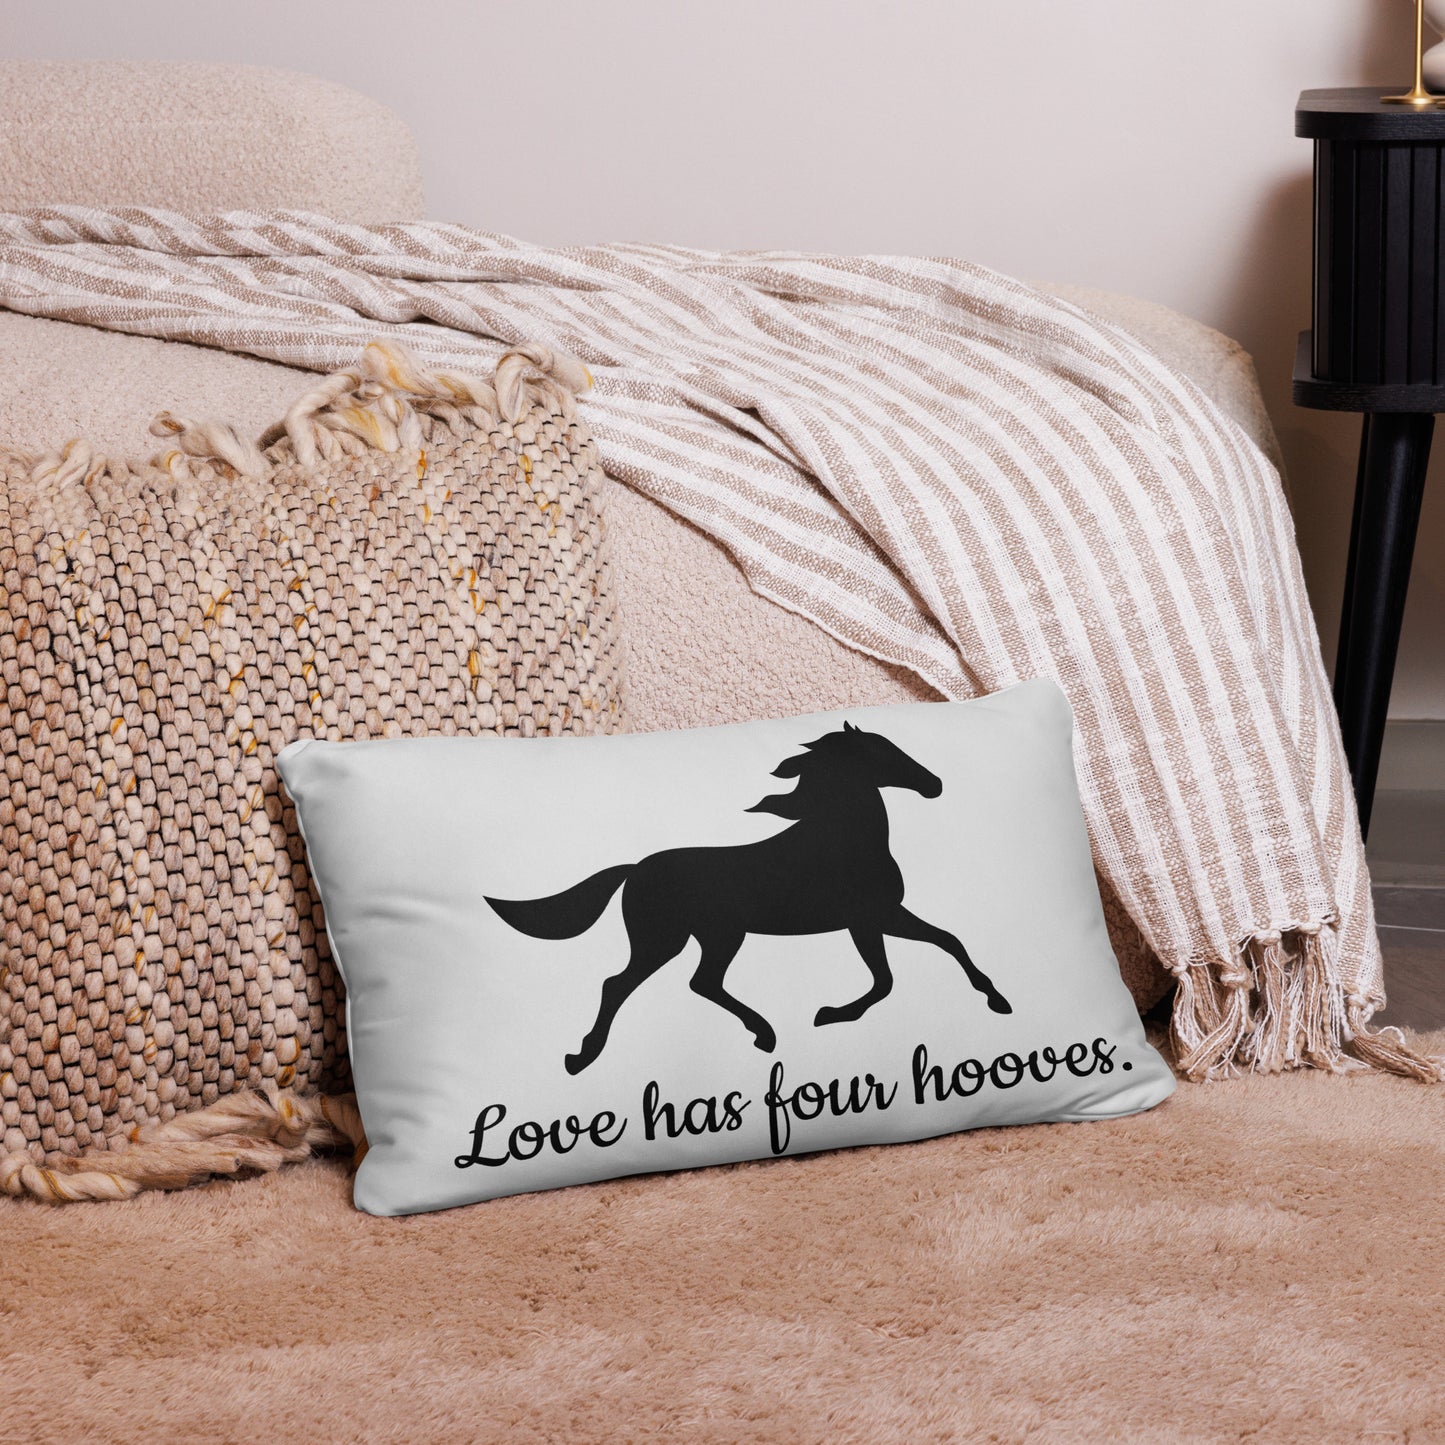 Love has four hooves Pillow